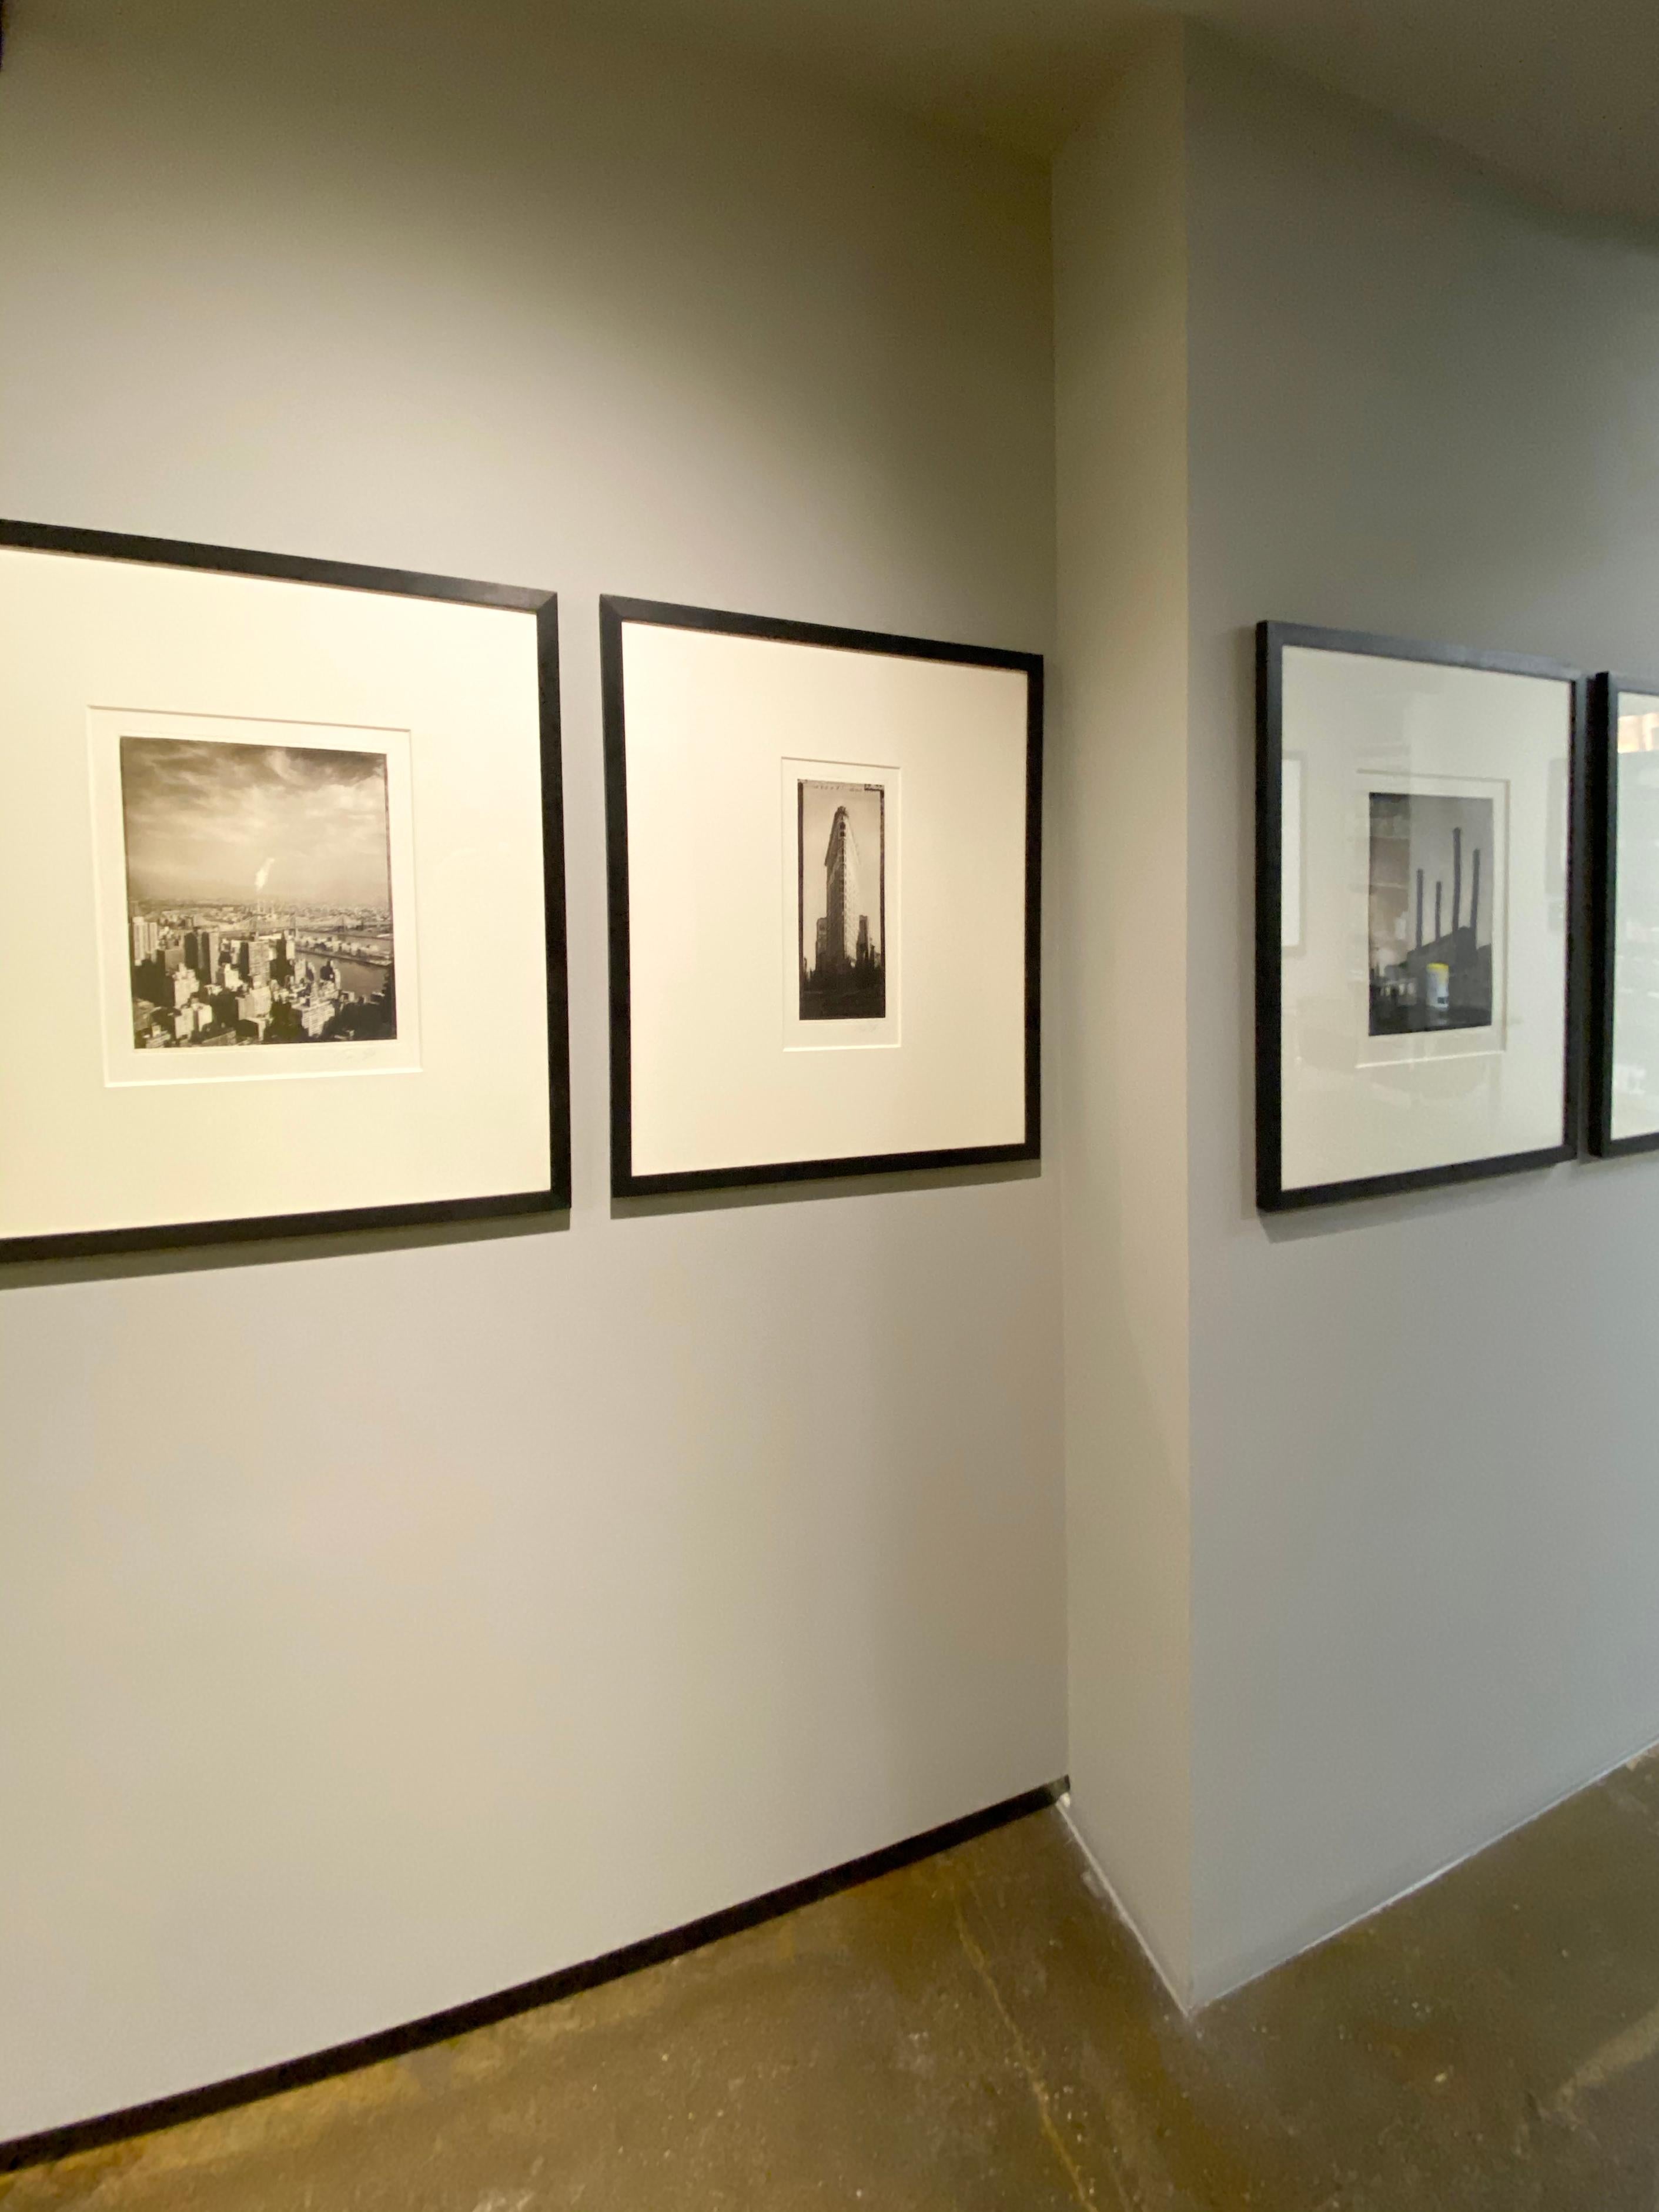 Photogravure from the Tom Baril 'Manhattan' Portfolio. 
Edition of 75, signed by the artist on bottom right.
Framing: acid free, archival framed, cotton rag mat.
Glazing: Optium museum plexi. 

A graduate of New York’s School of Visual Arts, Tom